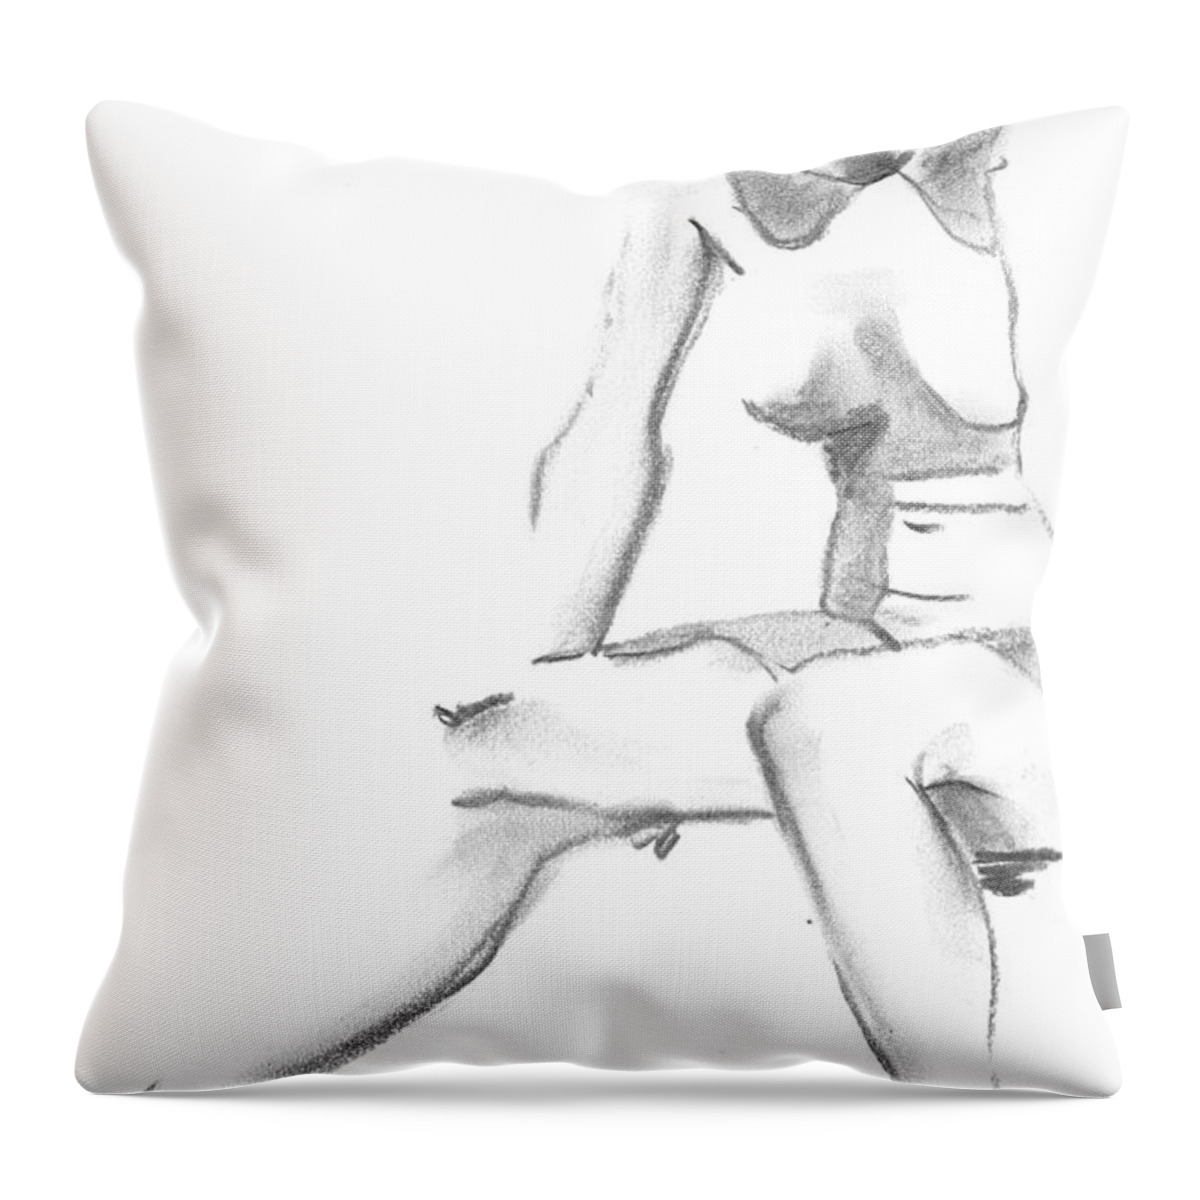 Sitting Throw Pillow featuring the drawing Sitting by Marica Ohlsson